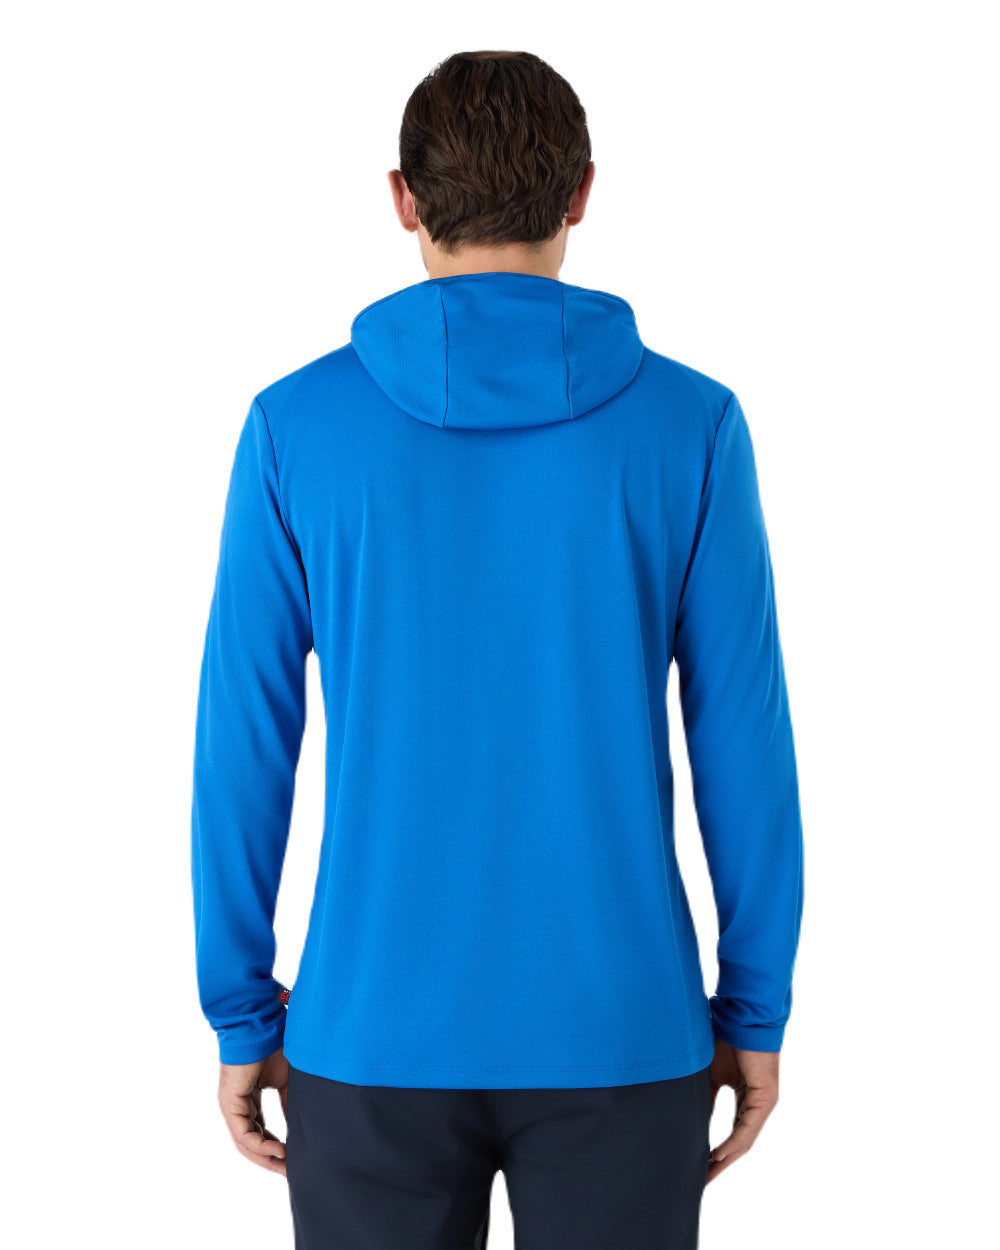 Aruba Blue Coloured Musto Mens Evolution Sunblock Fast Dry Hoodie On A White Background 